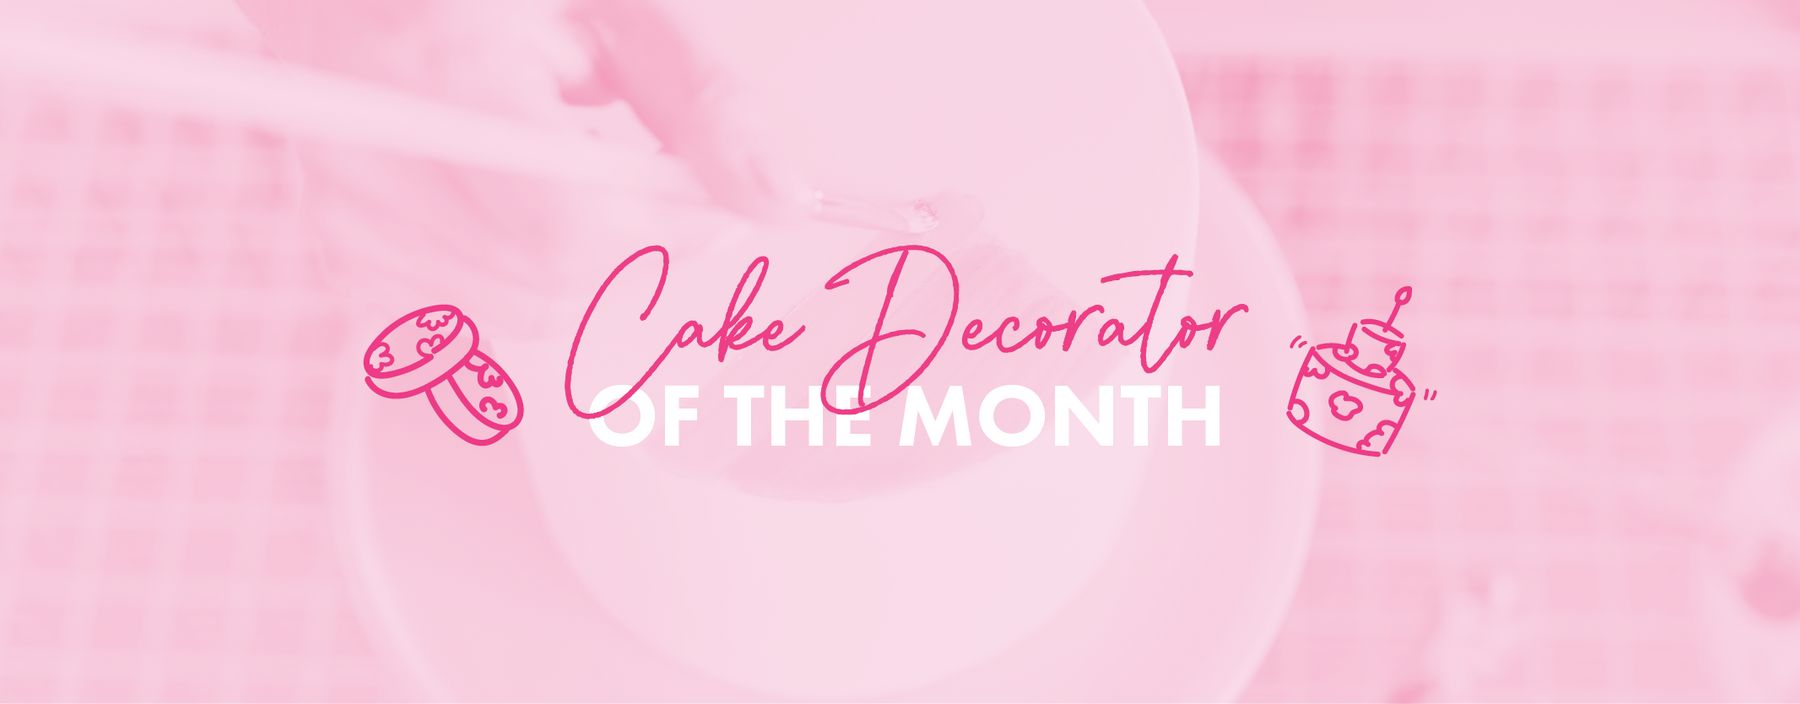 February Cake Decorator of the Month!